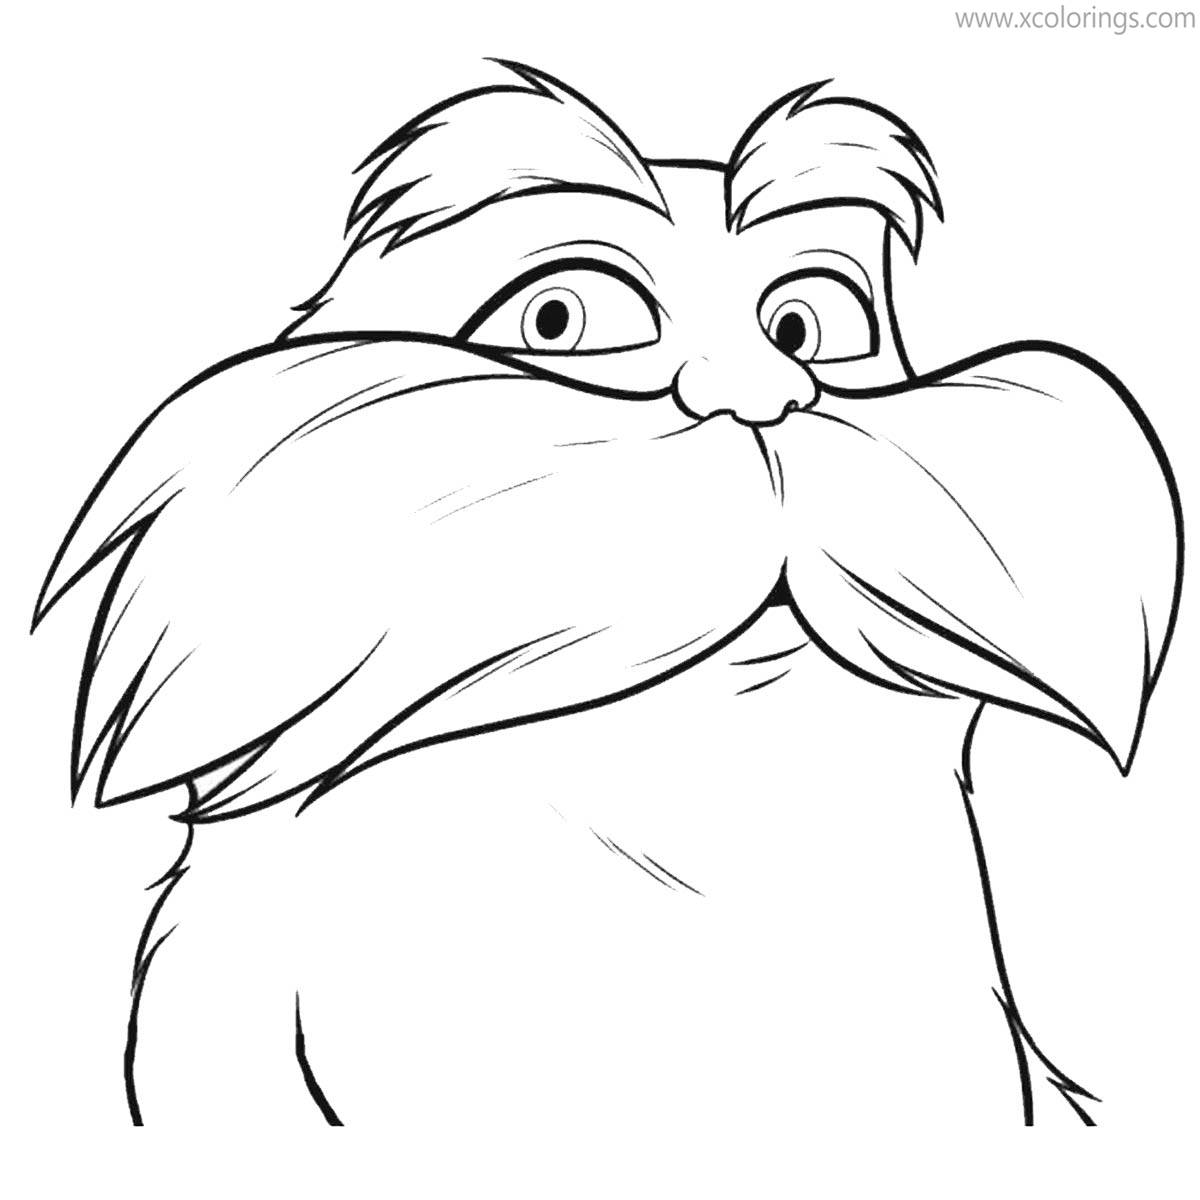 Free Dr Seuss Character Lorax Coloring Pages printable